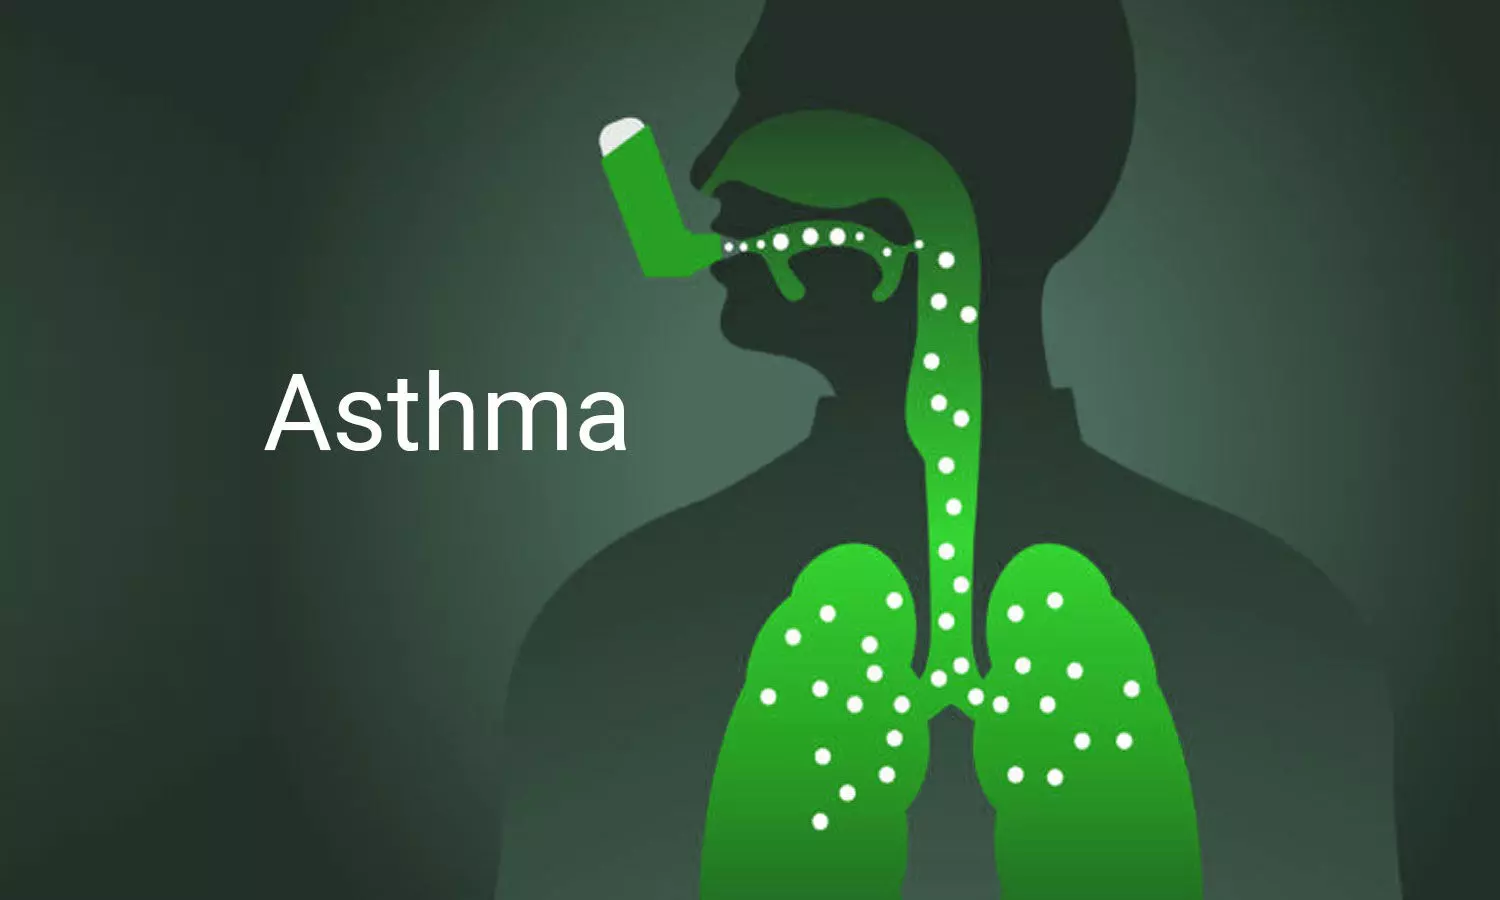 Iron overload may increase asthma severity, finds study